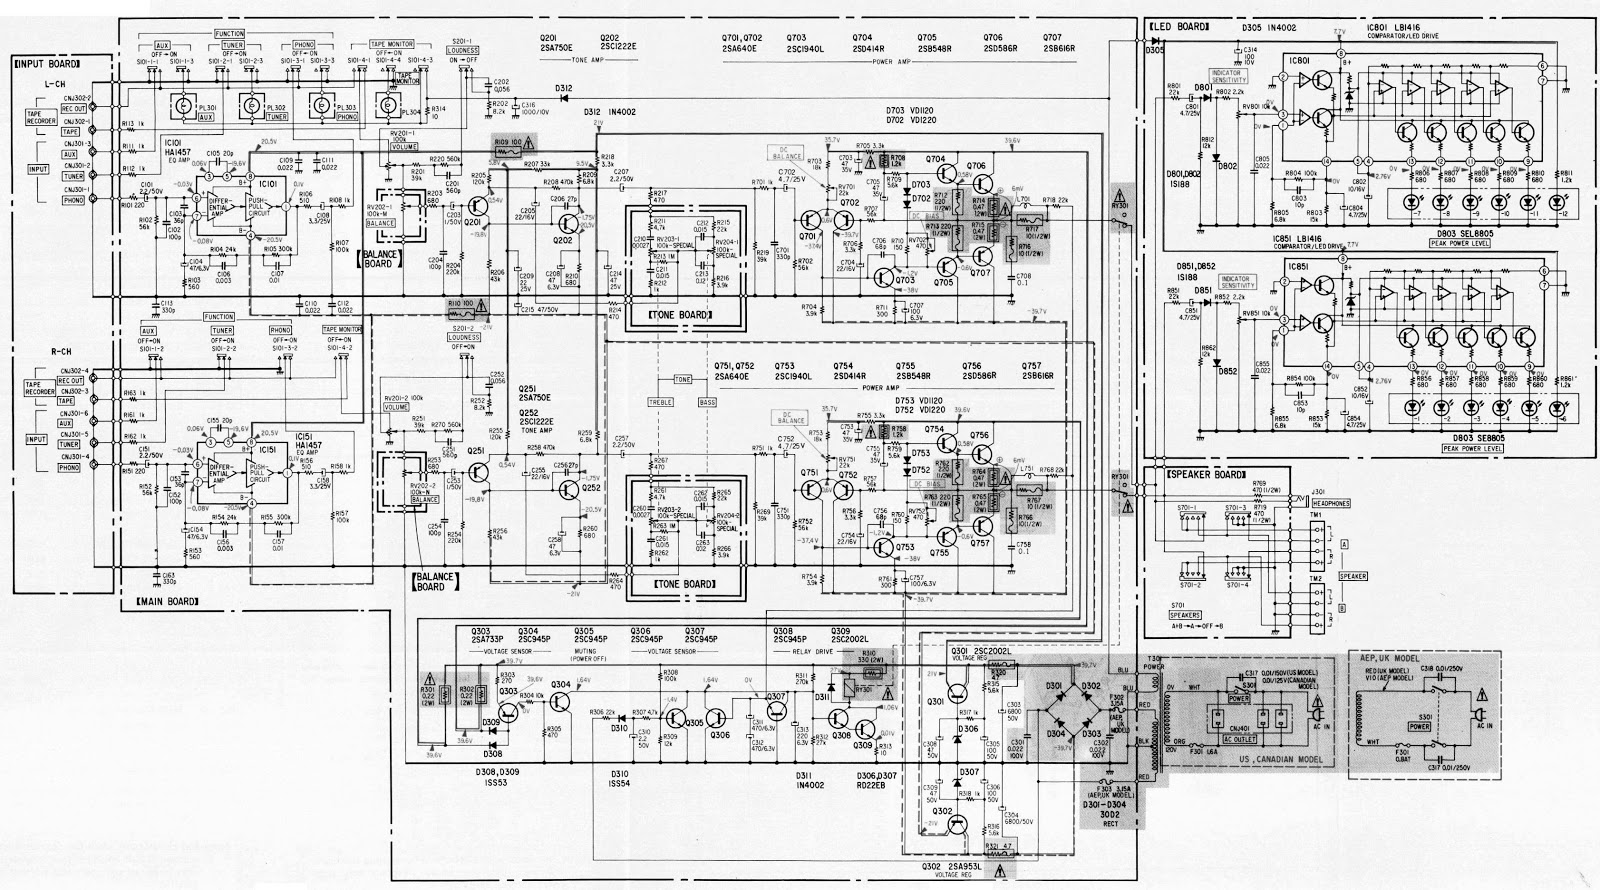 Sony TA F30 – Integrated Stereo Amplifier – Circuit Diagram | Electro help